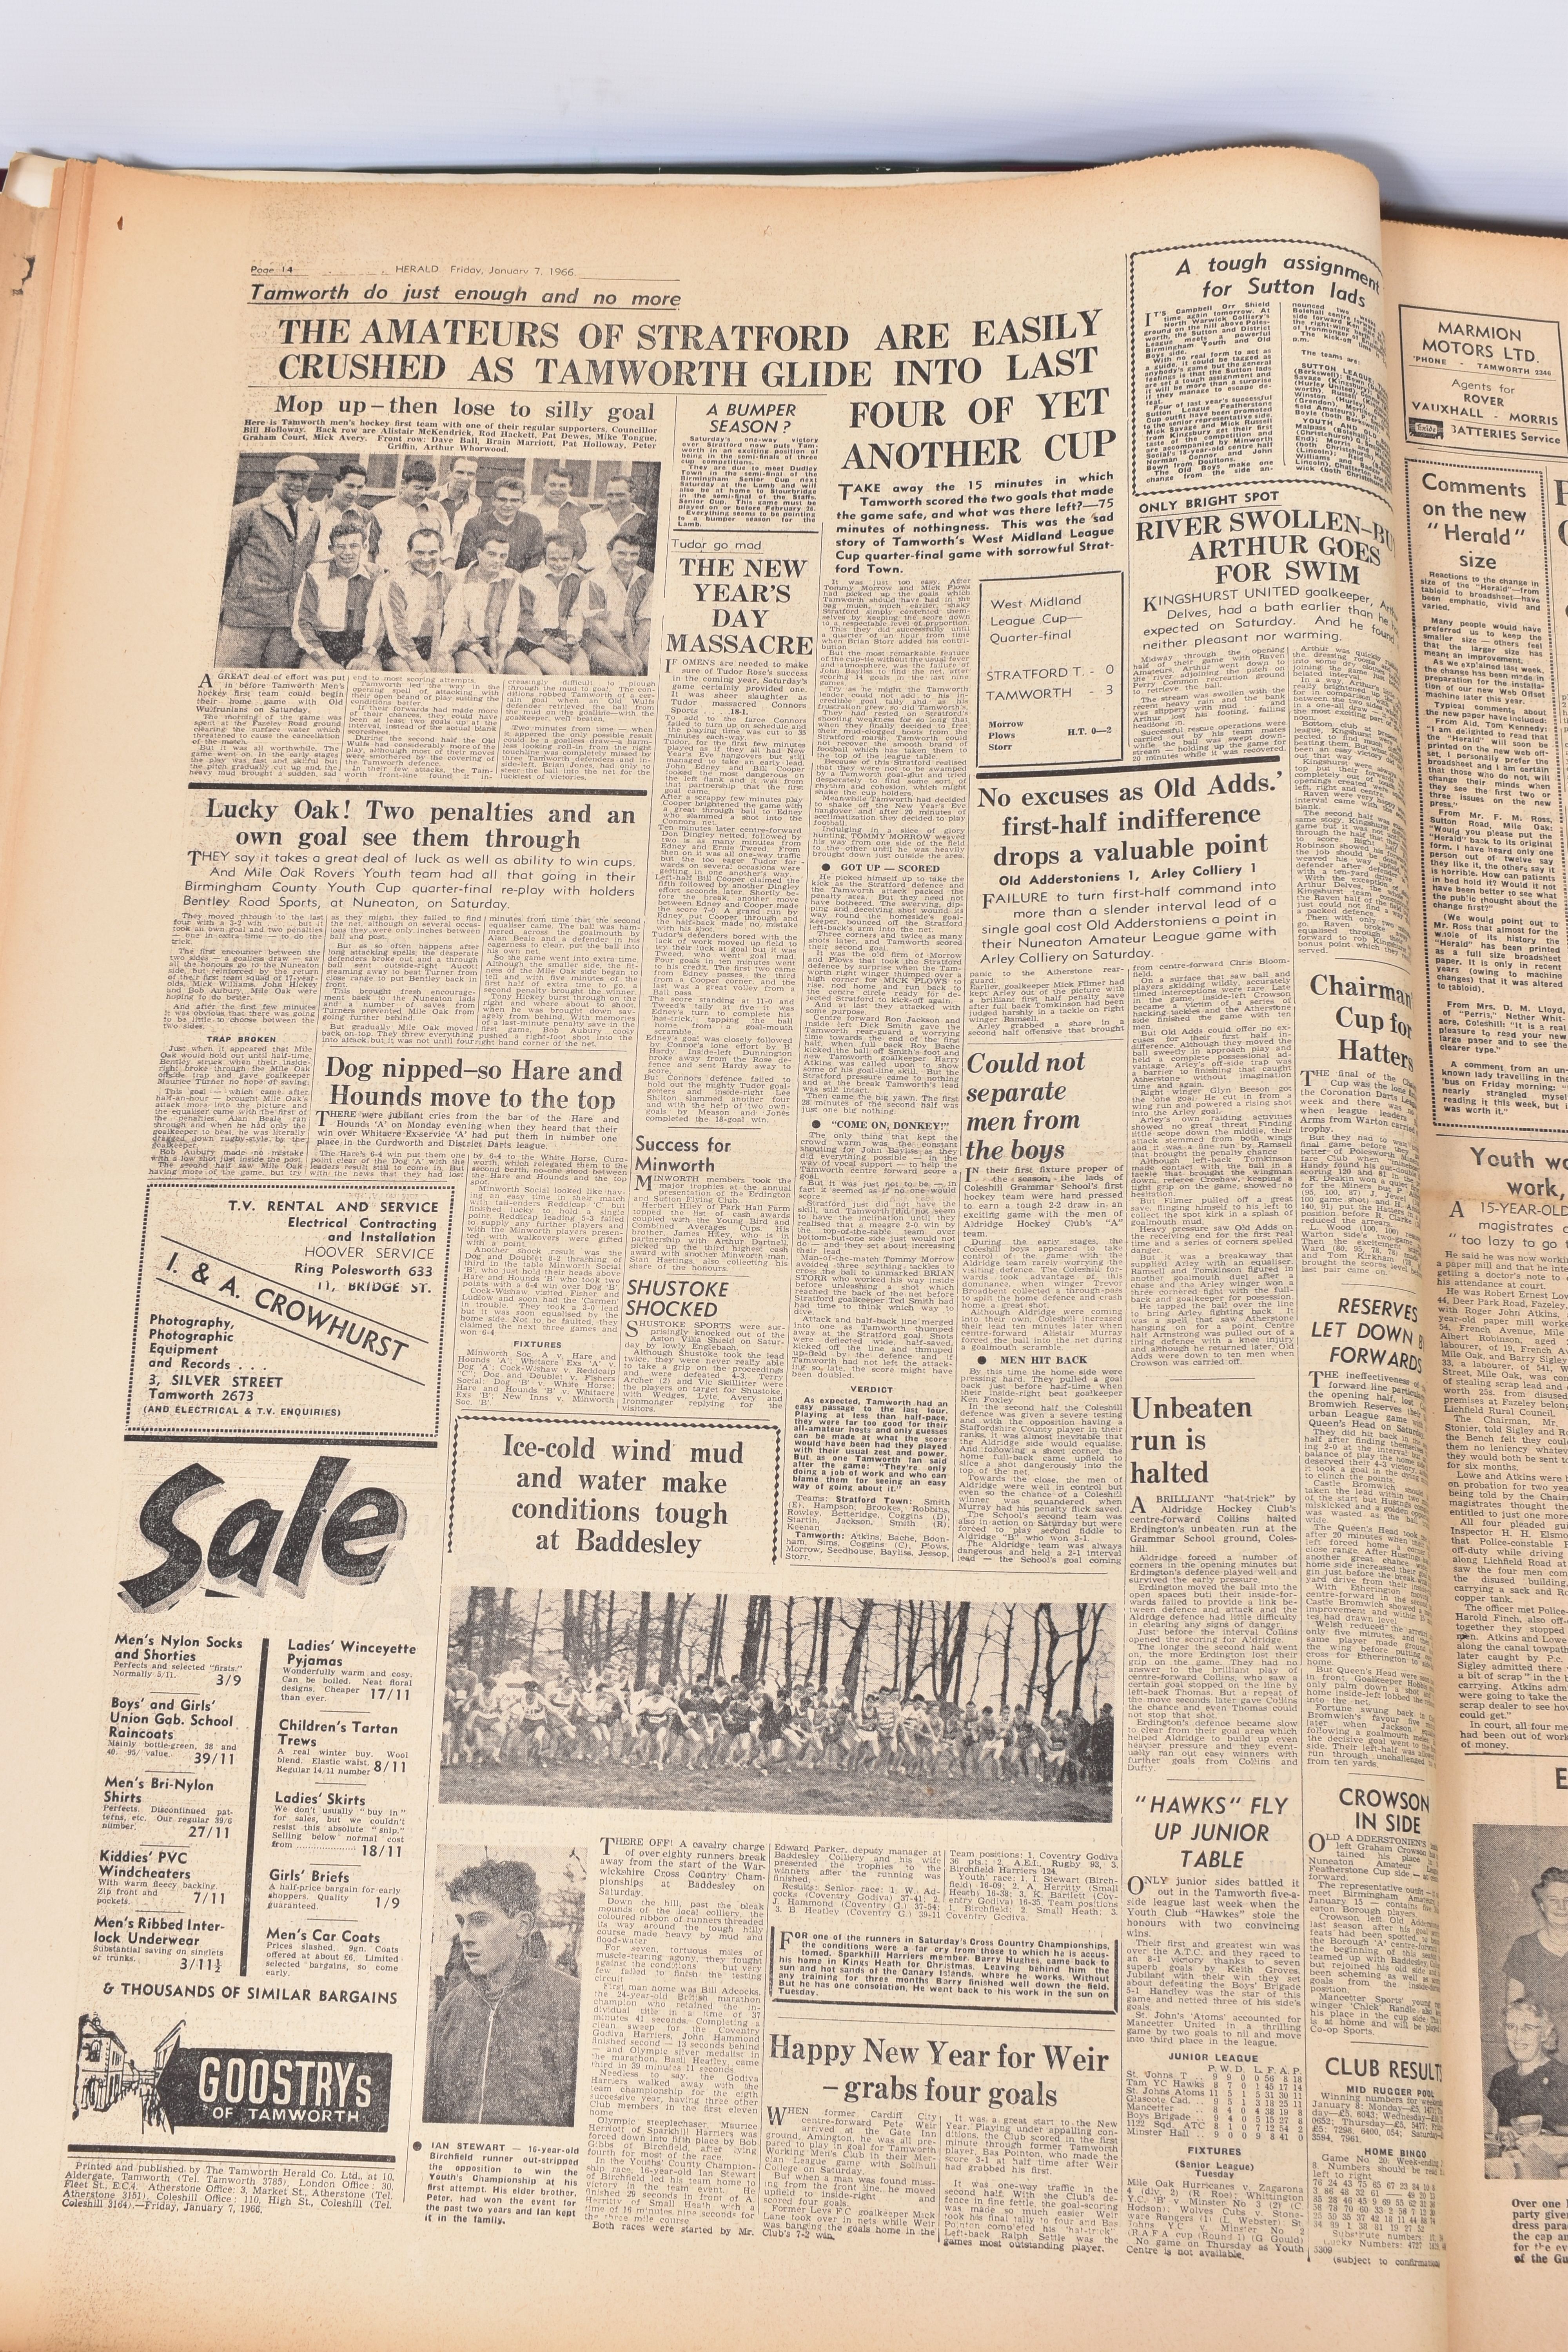 THE TAMWORTH HERALD, an Archive of the Tamworth Herald Newspaper from 1966, the newspapers are bound - Image 7 of 14